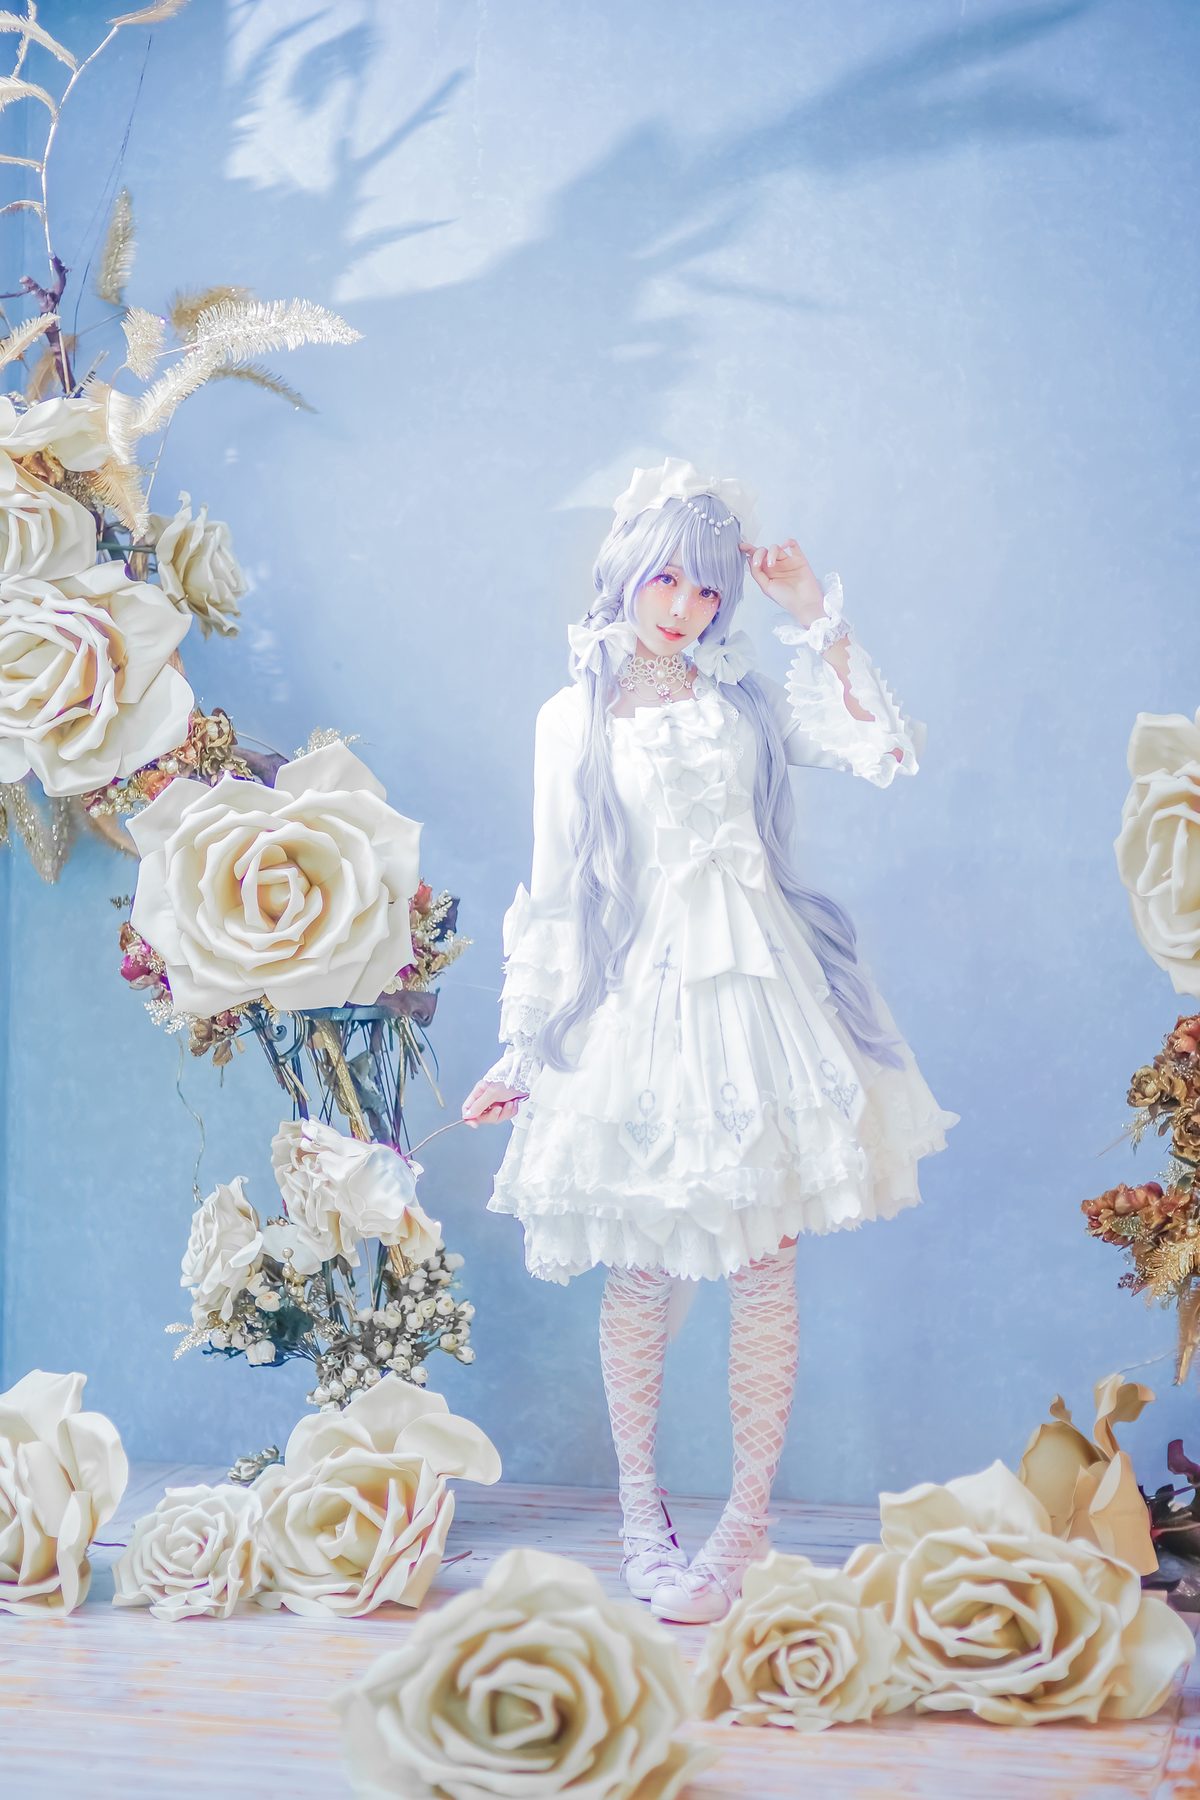 Coser@Ely_eee ElyEE子 TUESDAY TWINTAIL A 0068 9416346523.jpg